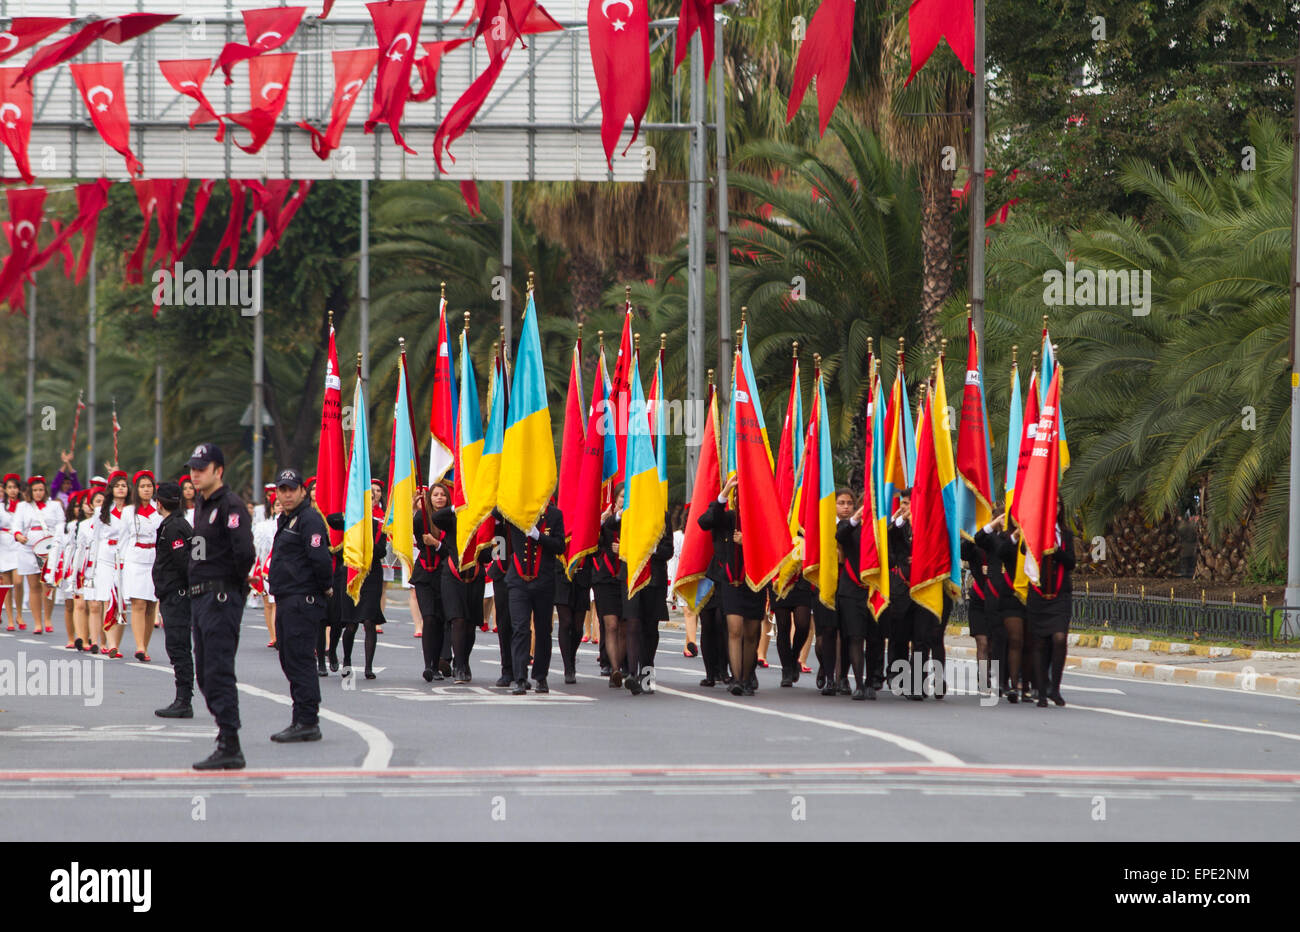 ISTANBUL, TURKEY - OCTOBER 29, 2014: Students march with flags in Vatan Avenue during 29 October Republic Day celebration of Tur Stock Photo